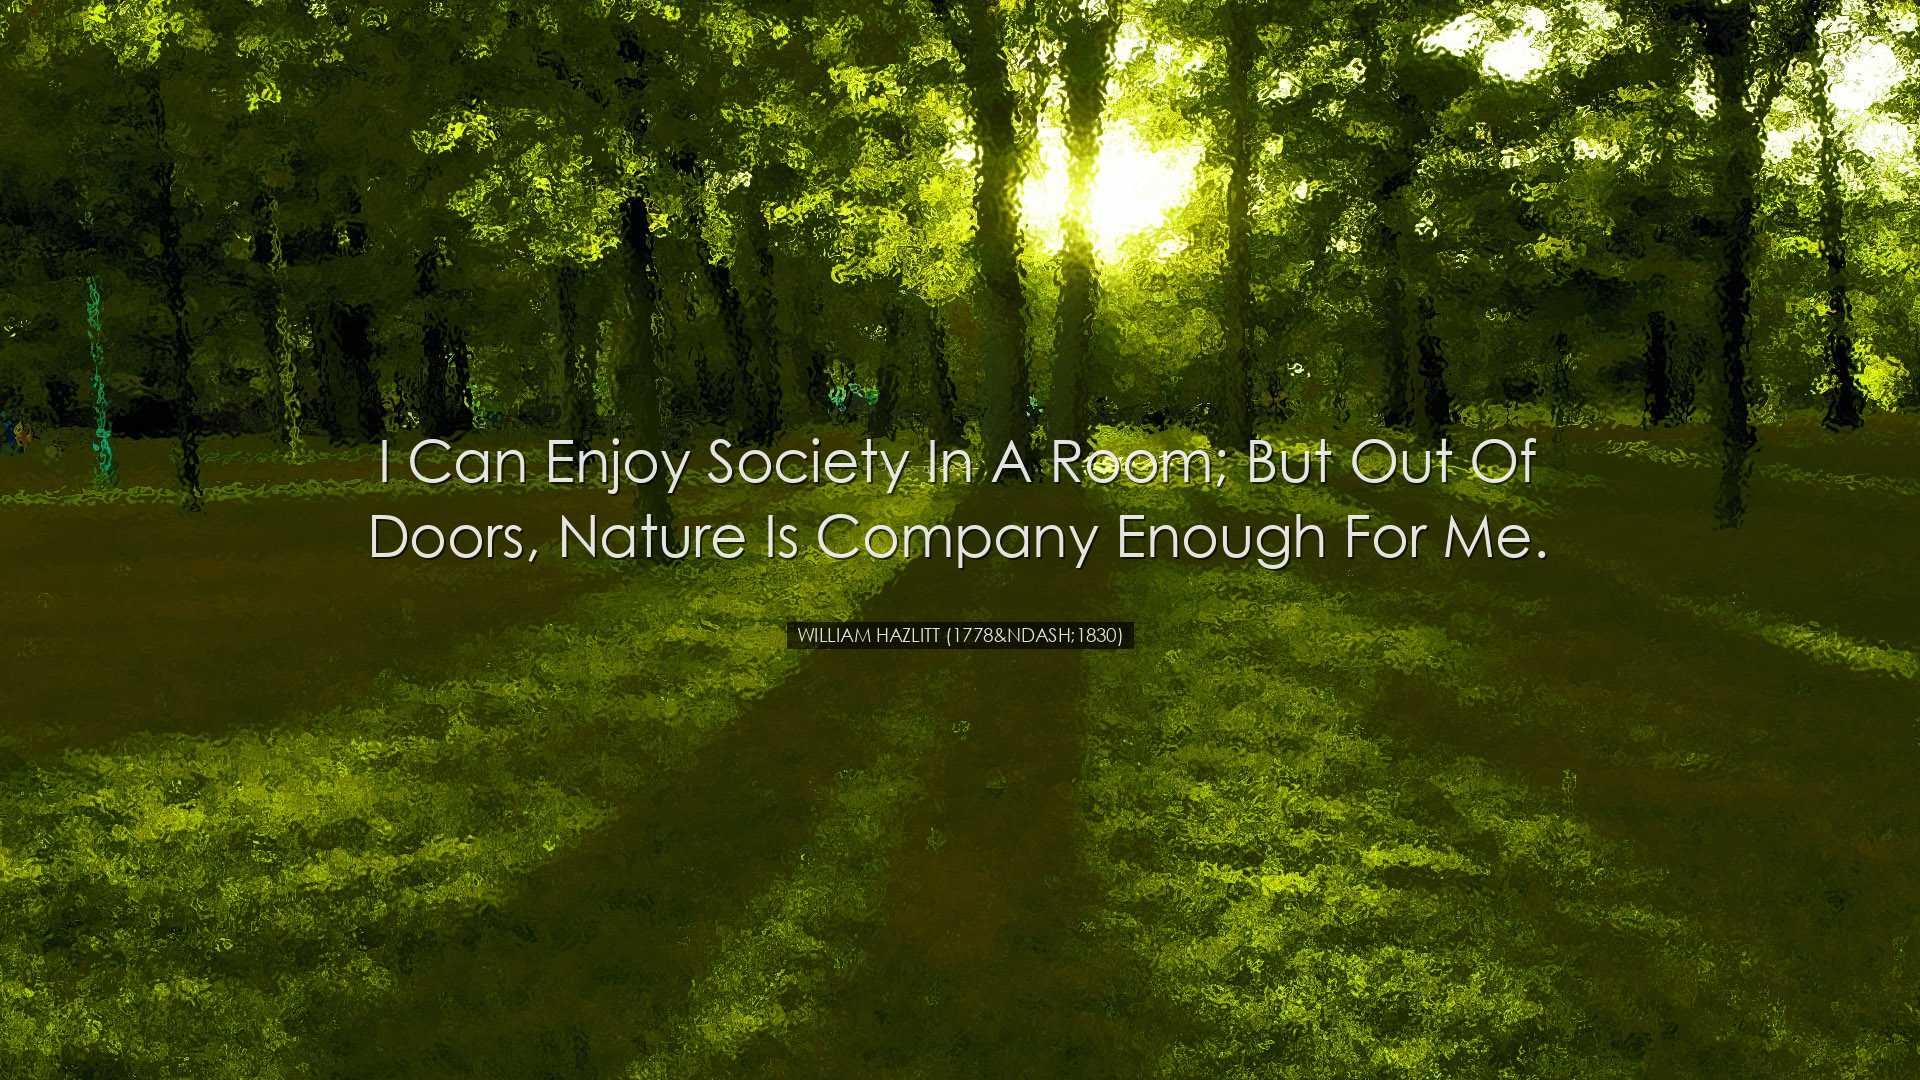 I can enjoy society in a room; but out of doors, nature is company